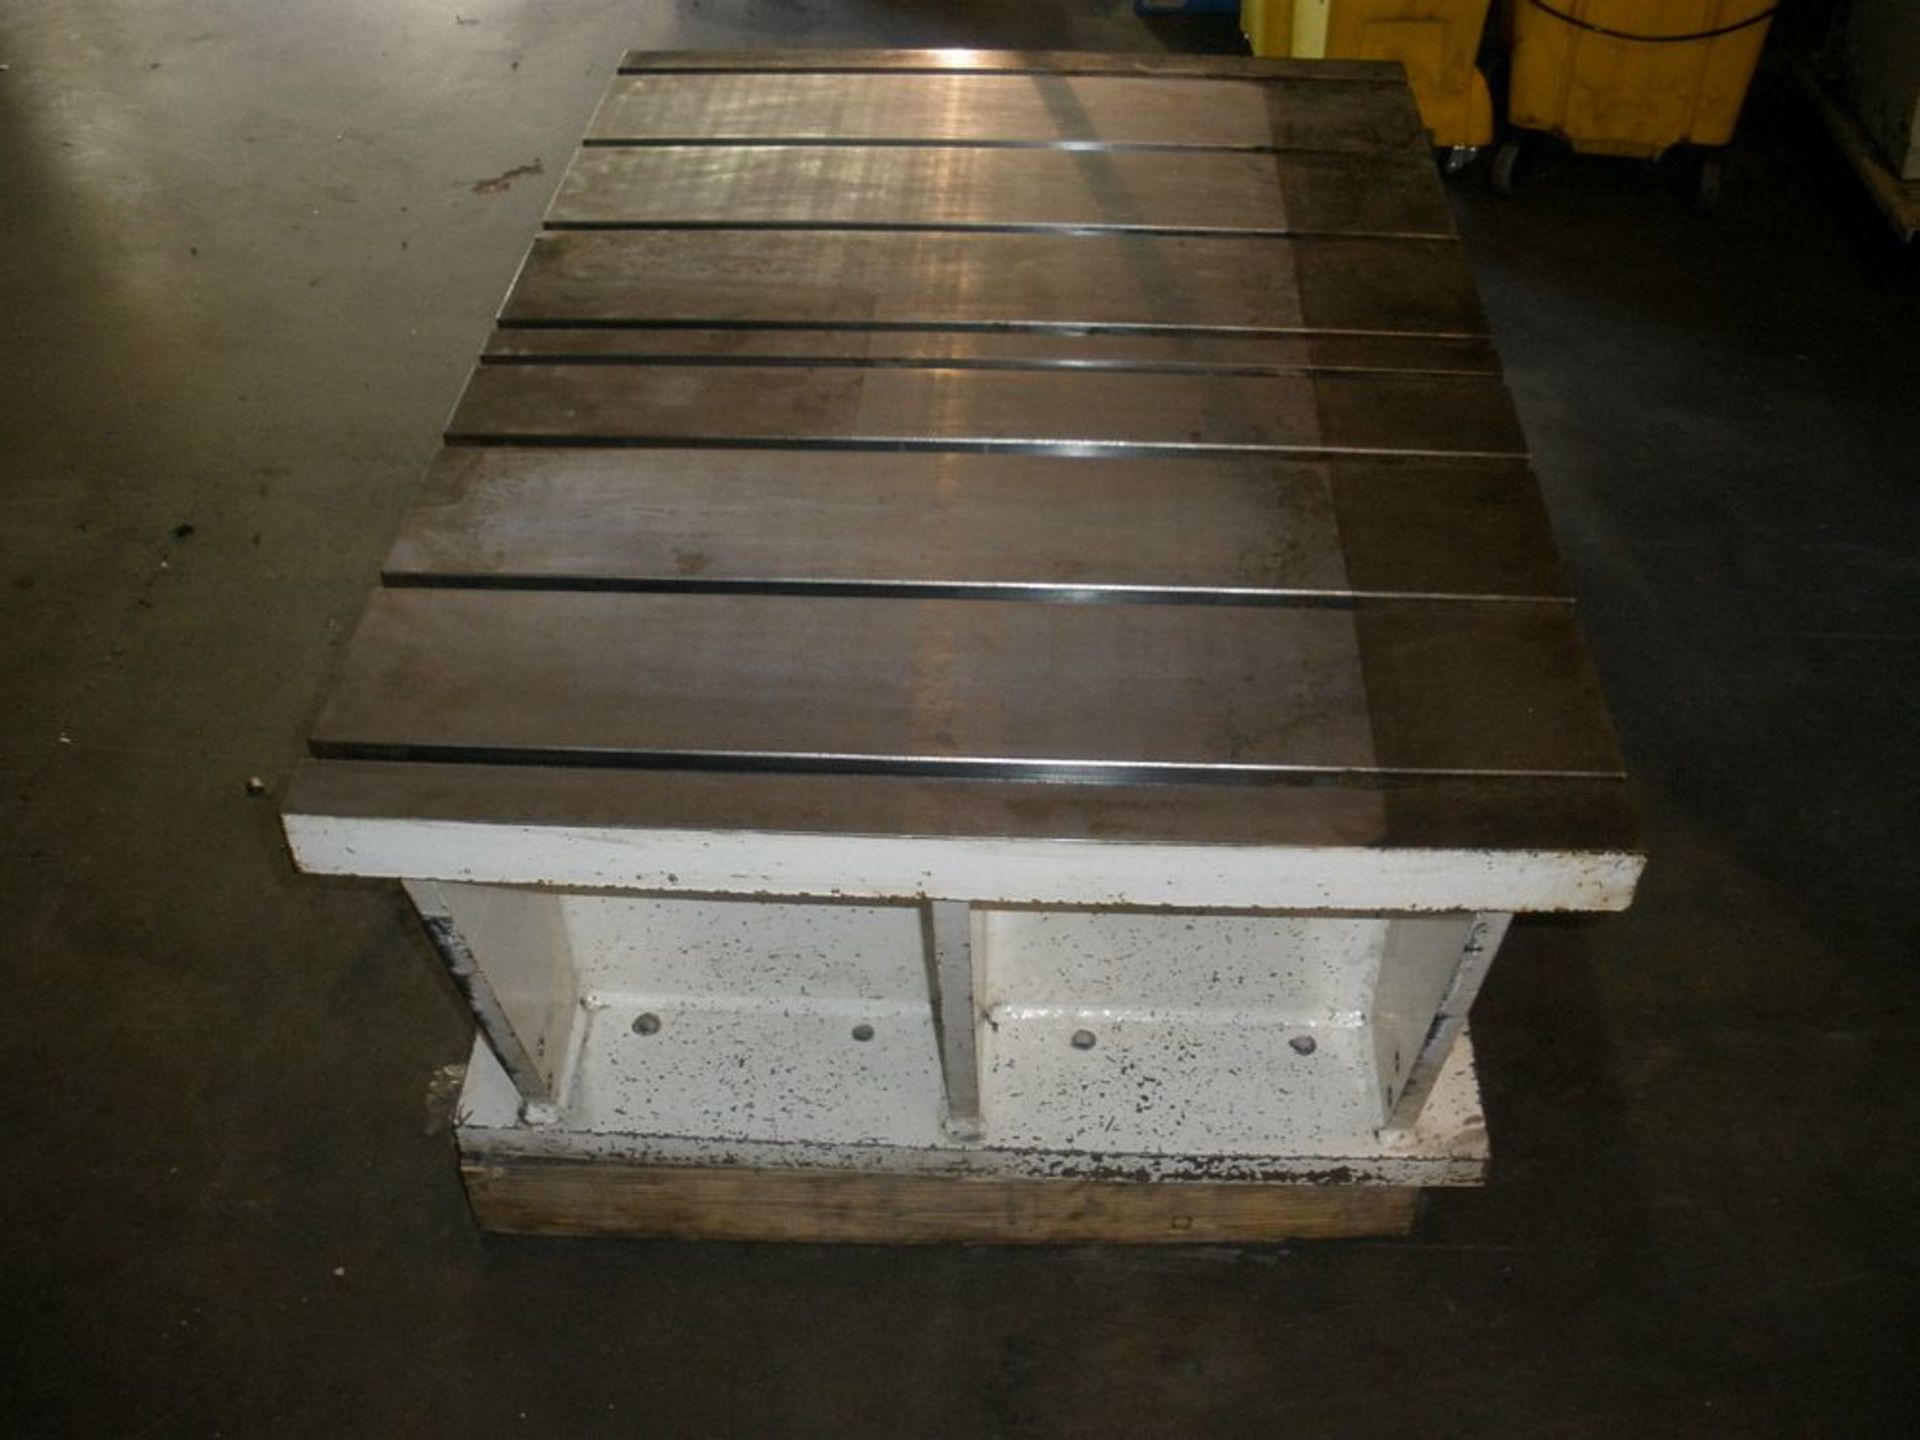 Heavy Duty "T" Slotted Steel Machine Riser Table with 1/2" "T" Slots 27"x40"x17"H - Image 3 of 4